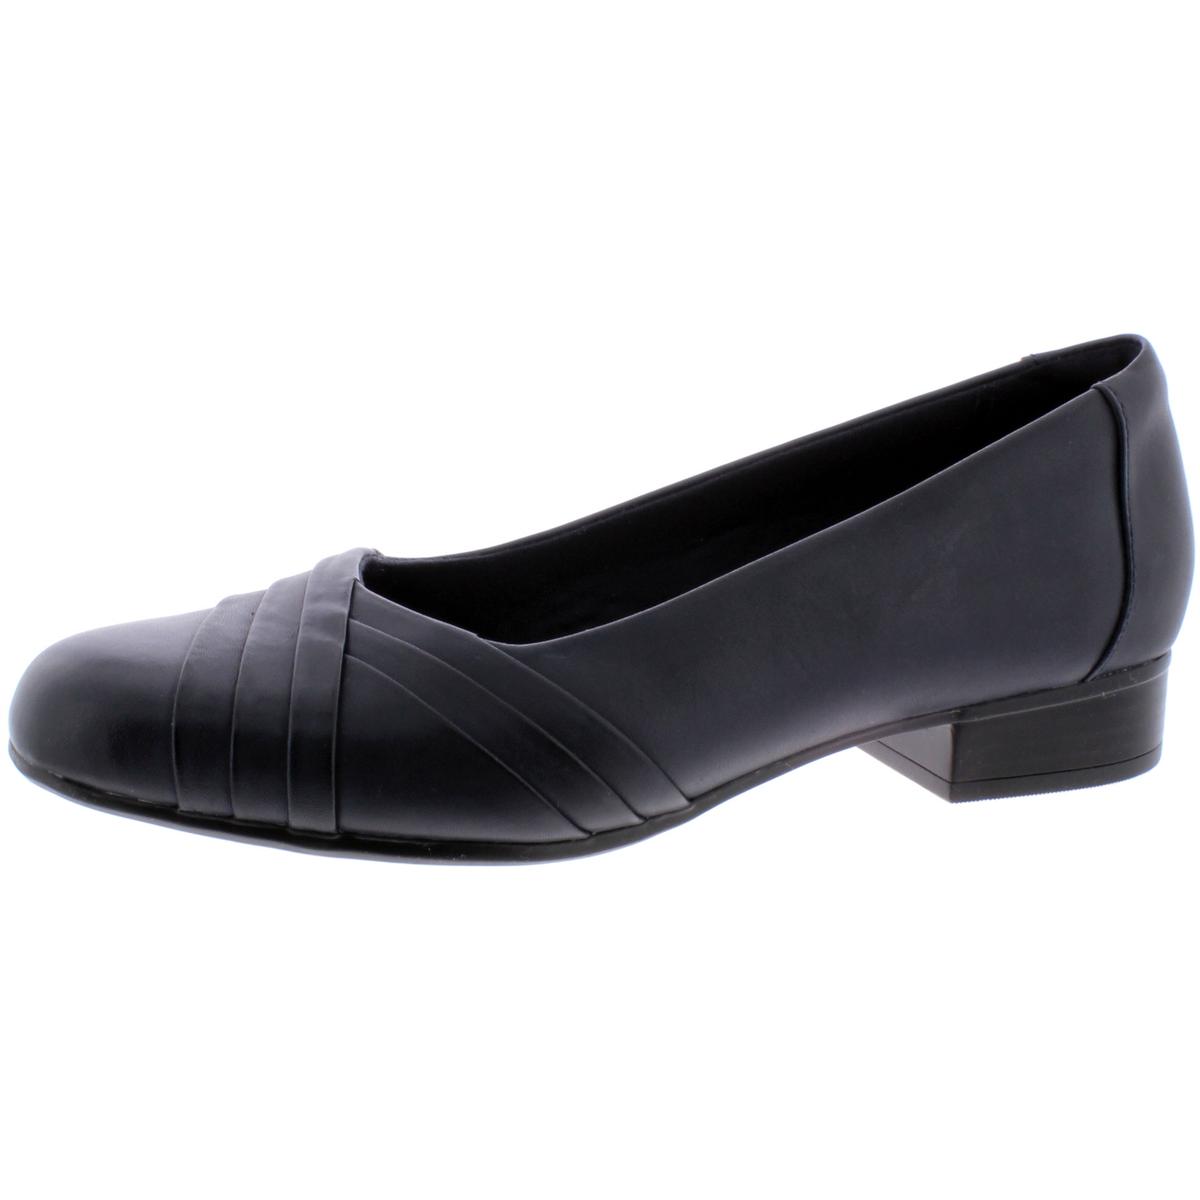 Clarks Juliet Petra Womens Leather Pleated Dress Shoes